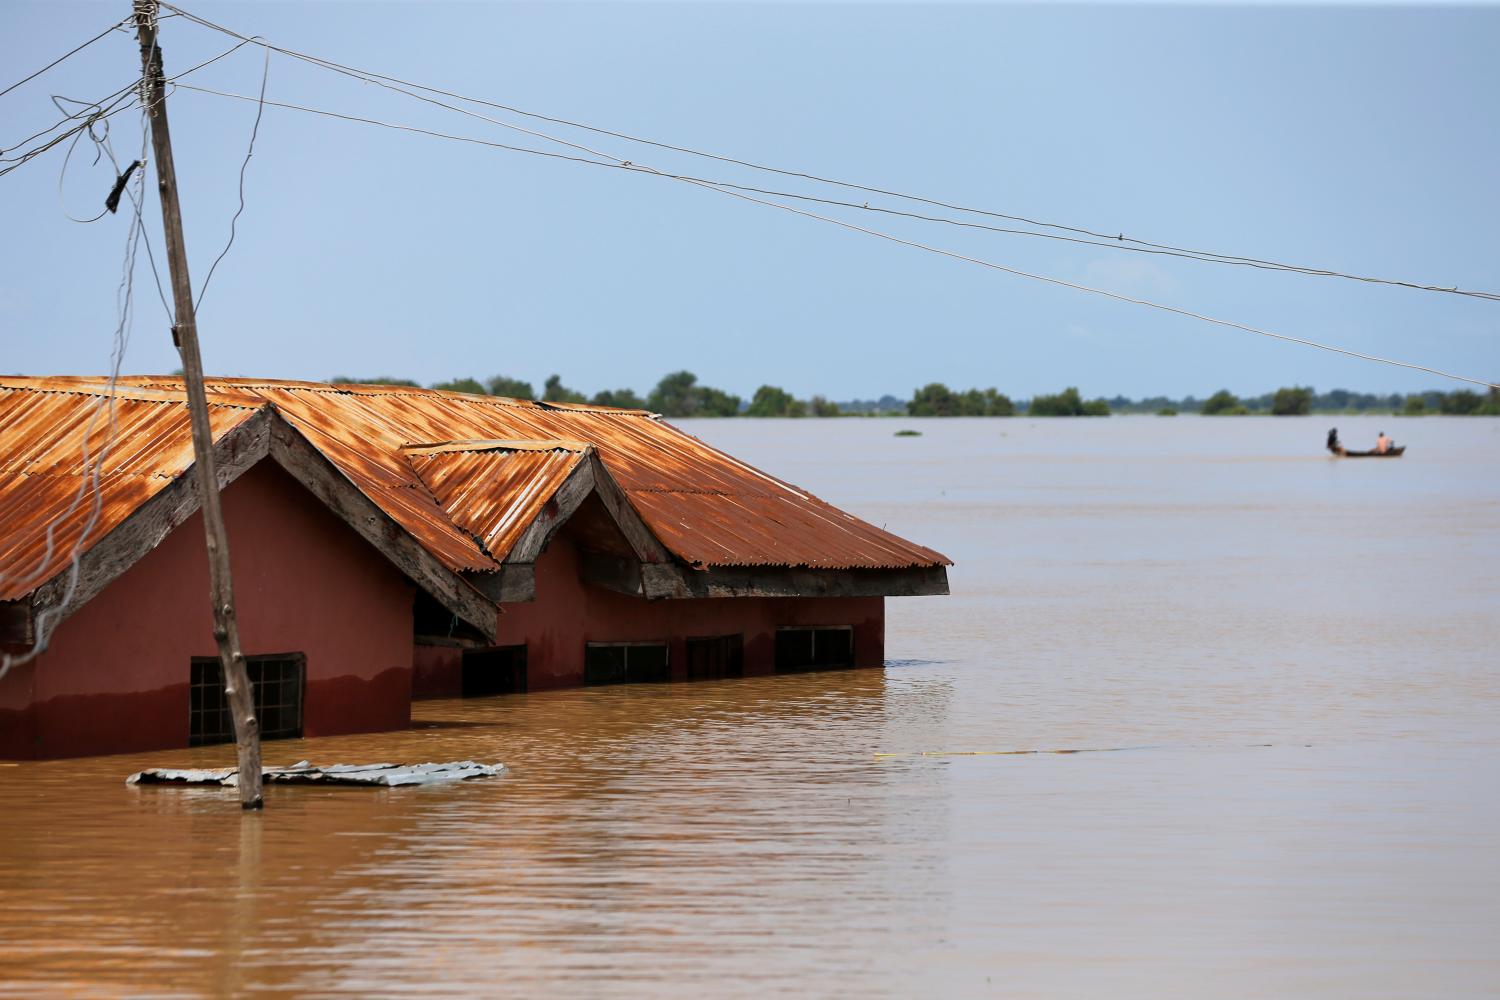 A house partially submerged in flood waters is pictured  in Lokoja city, Kogi State, Nigeria September 17, 2018. REUTERS/Afolabi Sotunde - RC1F06C2B7E0